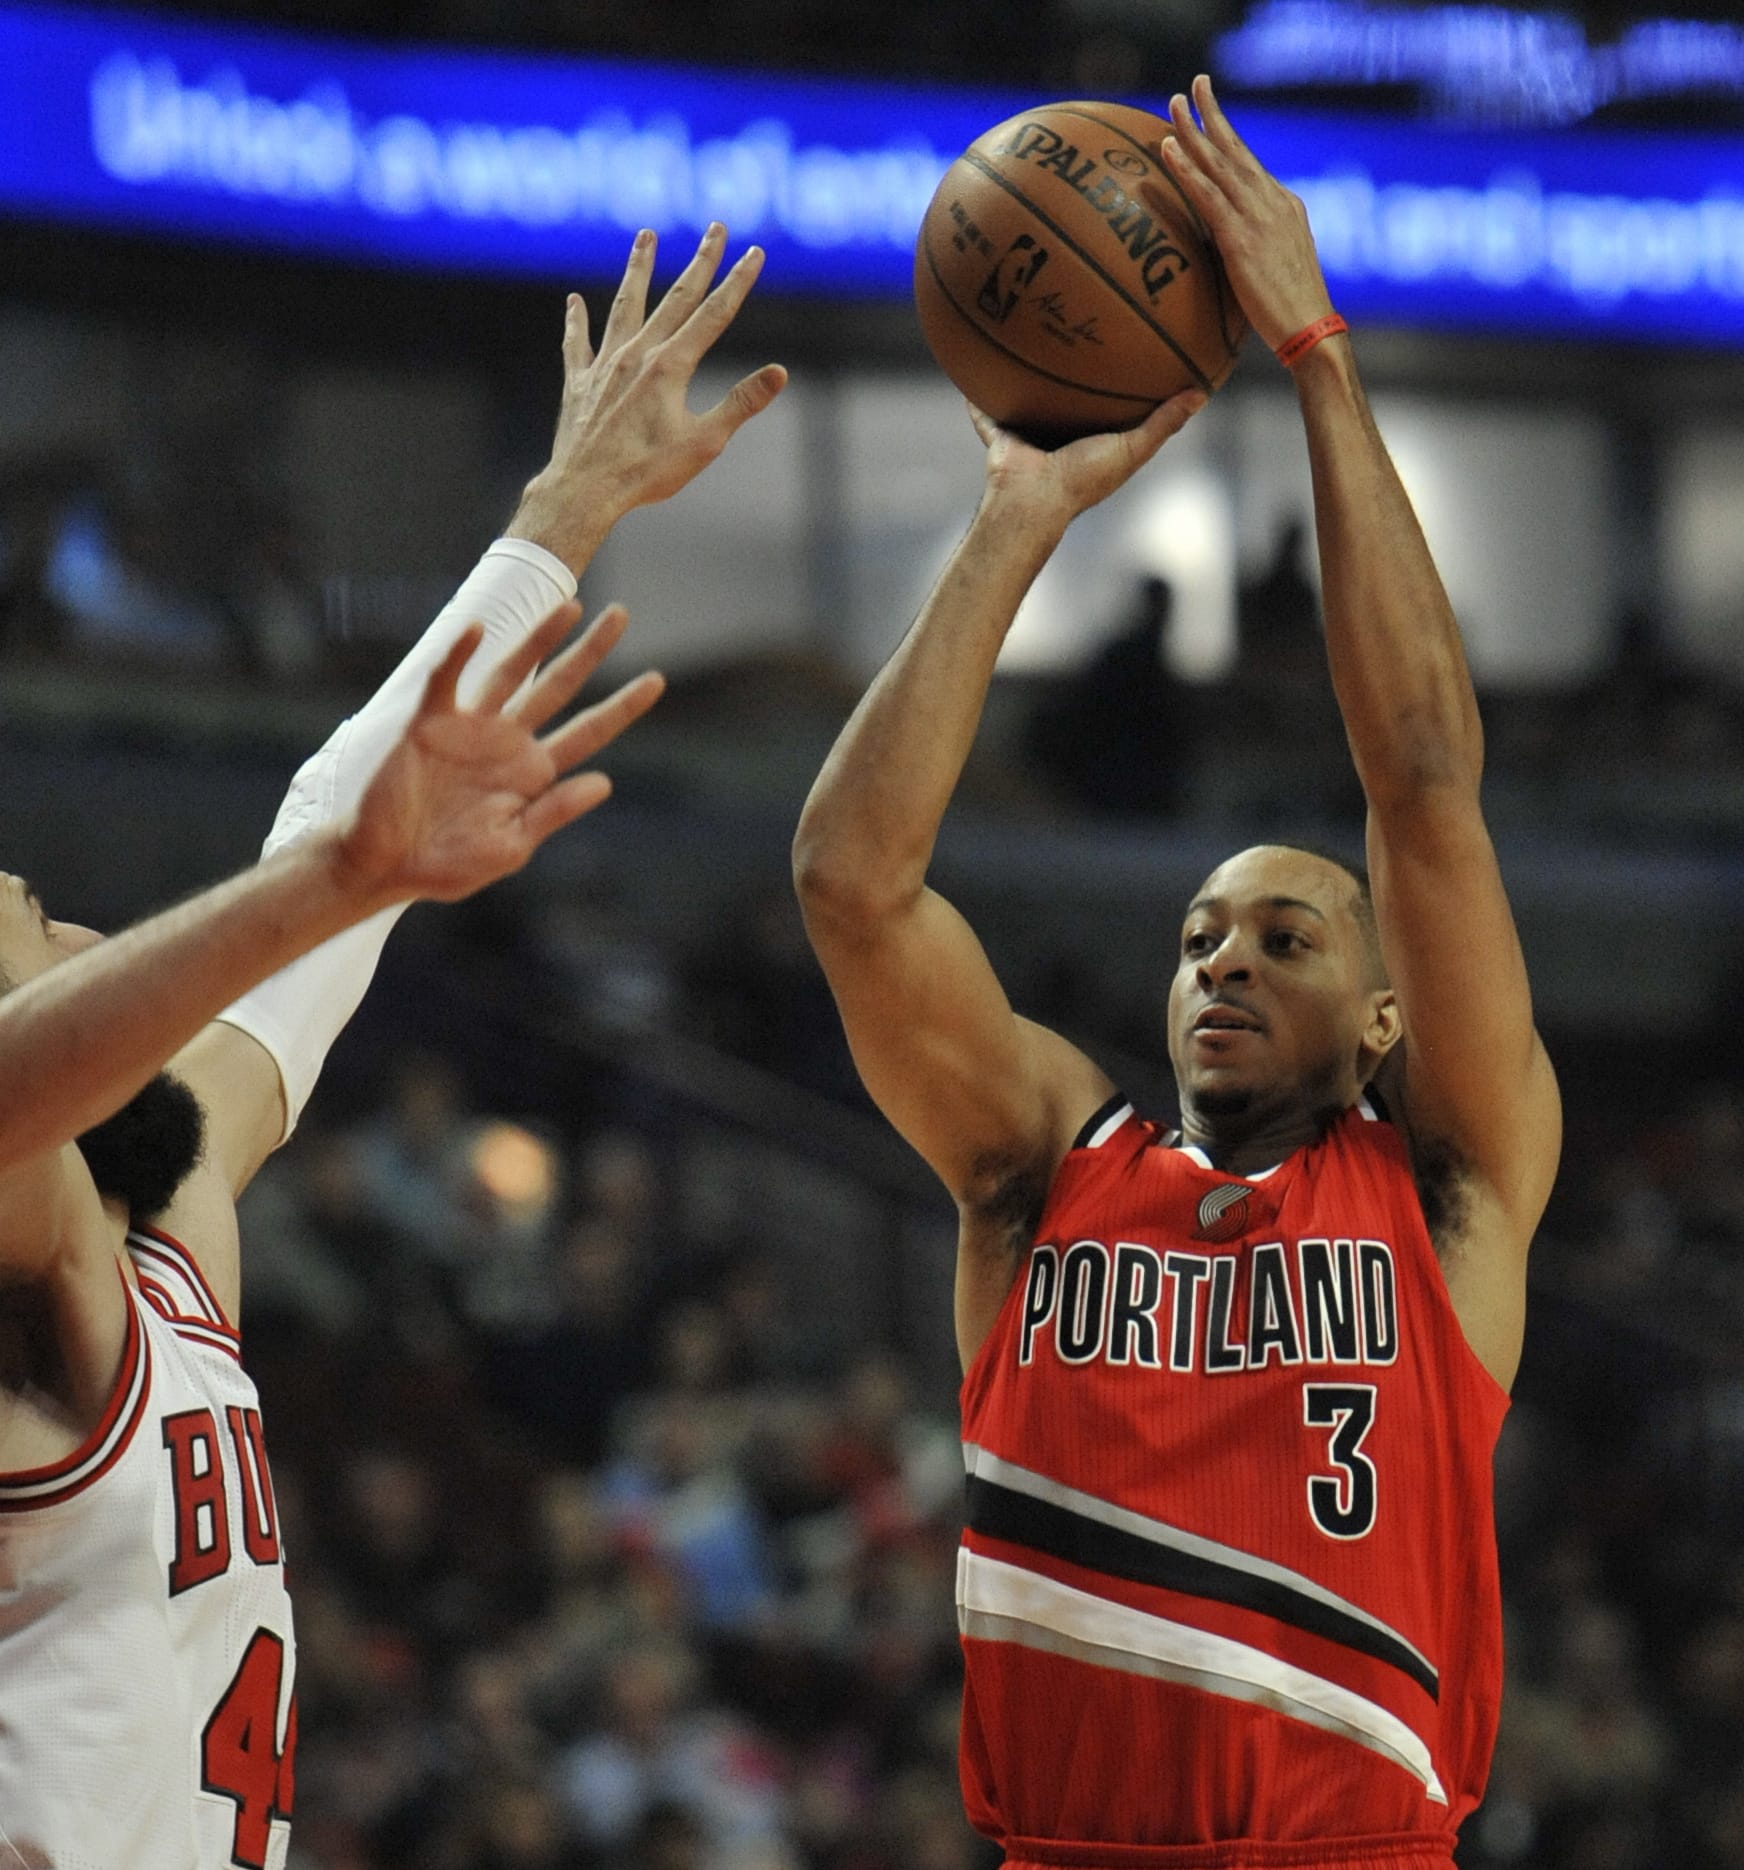 Portland Trail Blazers' CJ McCollum (3) goes up for a shot against Chicago Bulls' Nikola Mirotic (44) of Montenegro, during the first half of a NBA basketball game Monday, Dec. 5, 2016, in Chicago. Portland won 112-110.